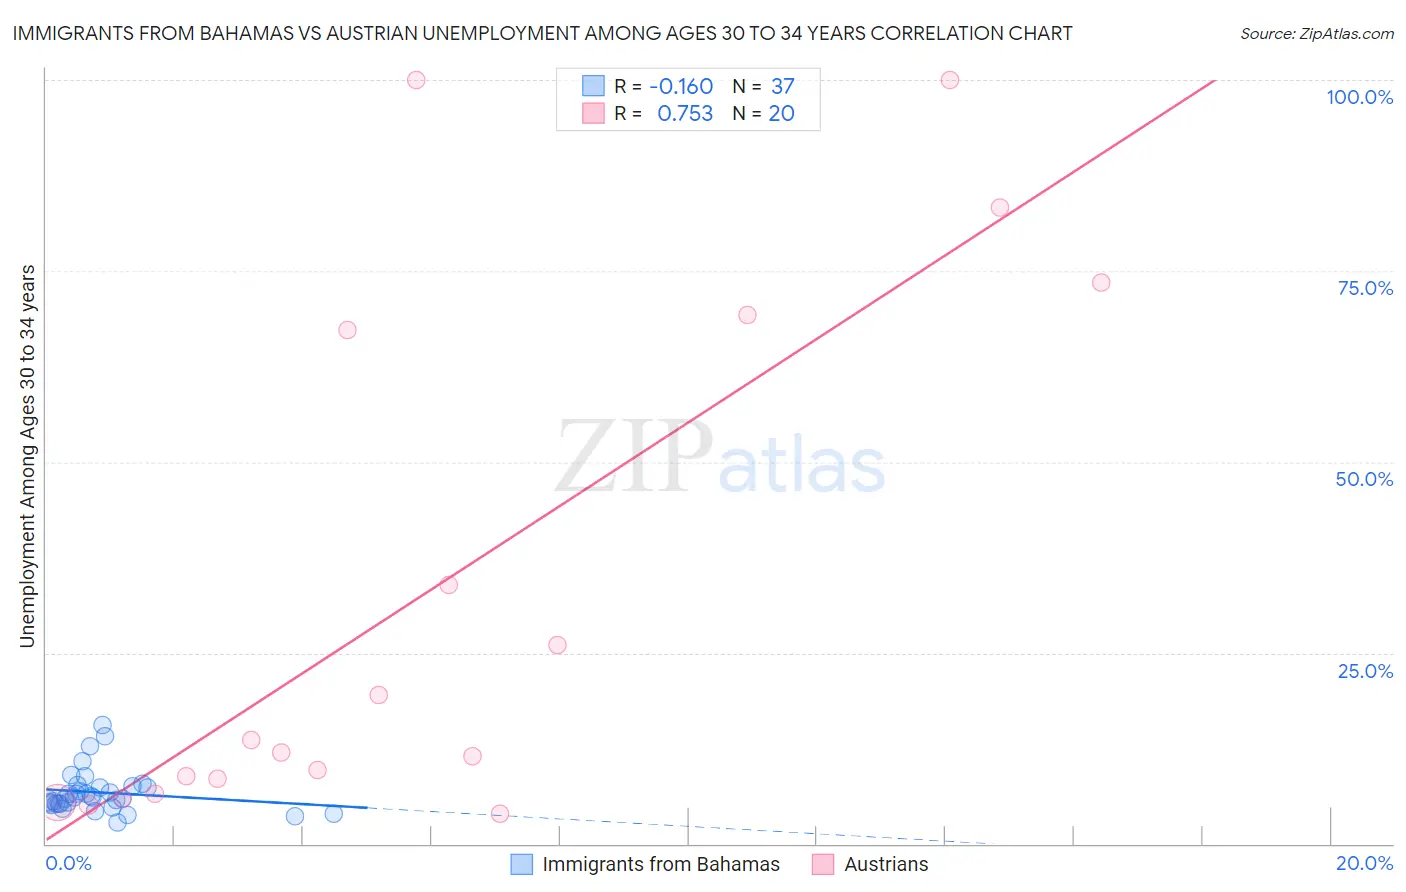 Immigrants from Bahamas vs Austrian Unemployment Among Ages 30 to 34 years